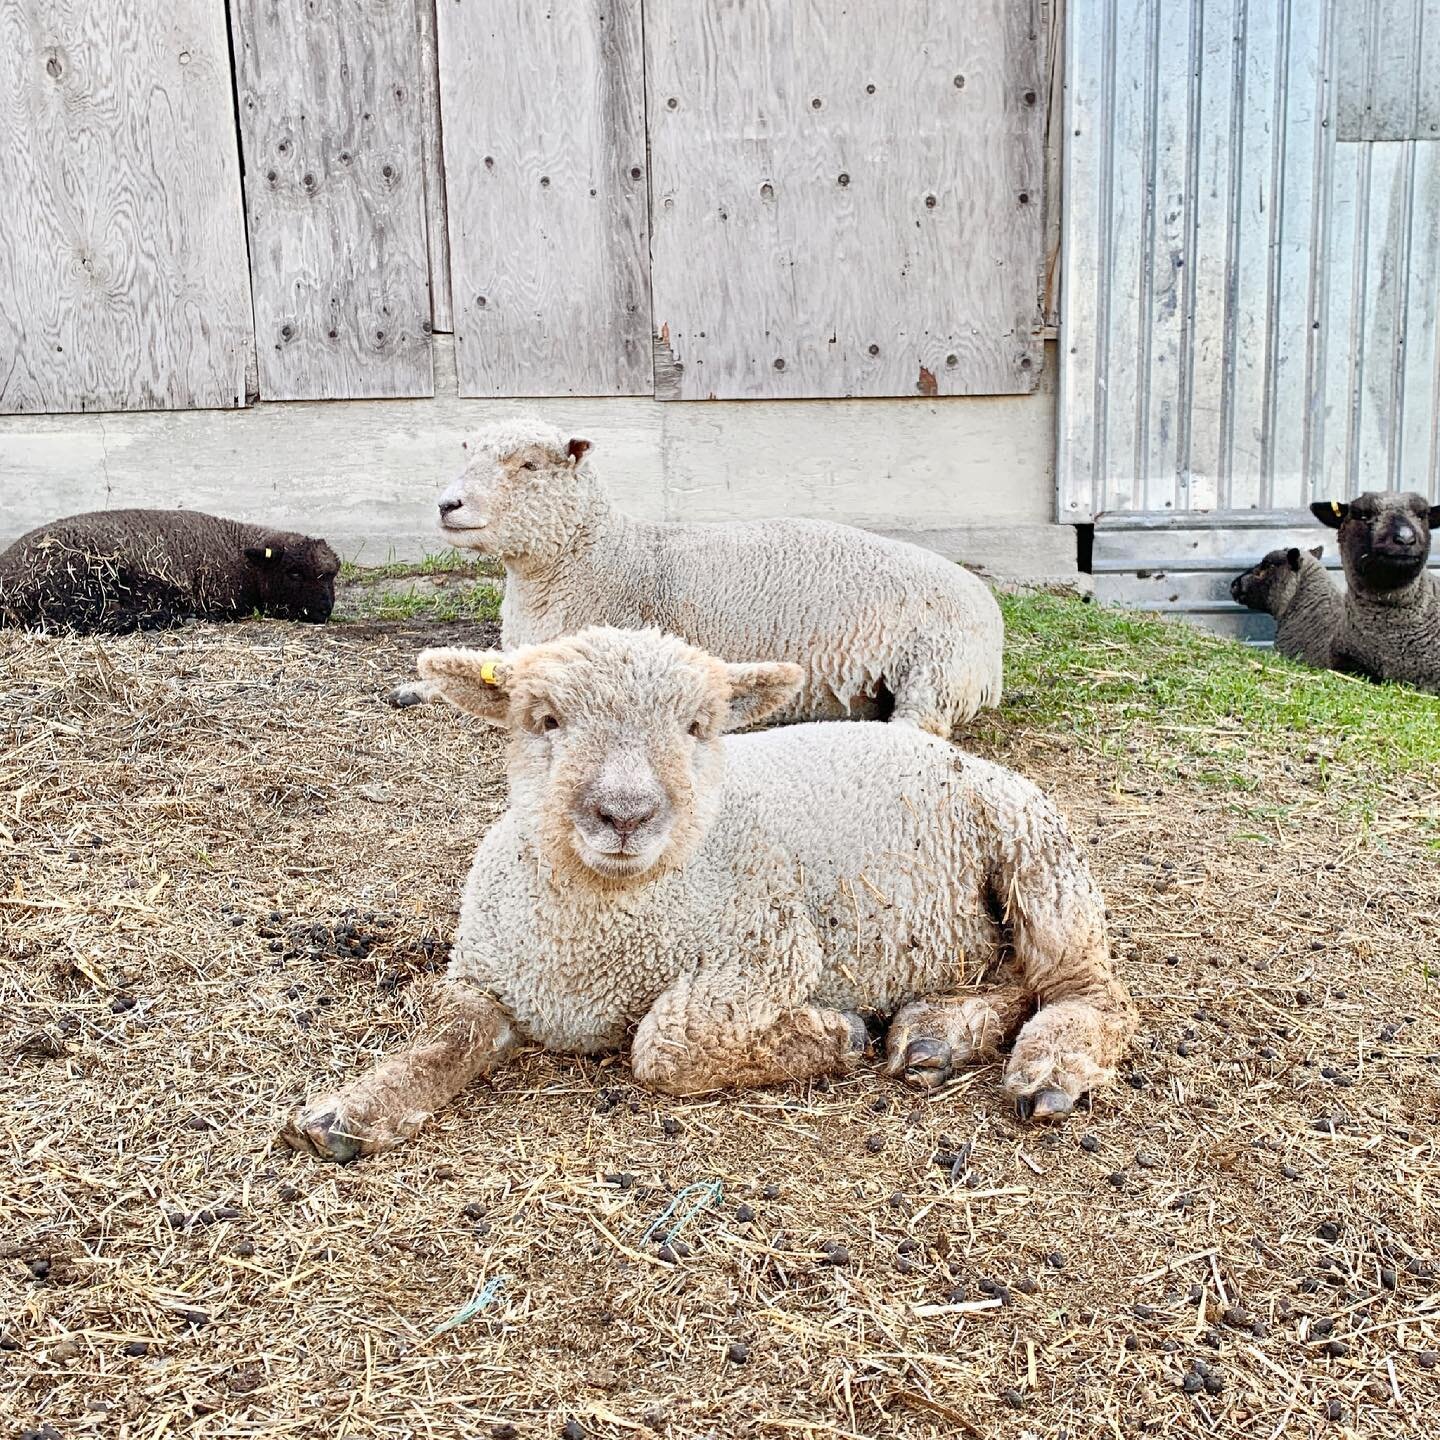 My spring born lambs are getting so big! My original 5 ewes were bred for spring lambs. I had the opportunity to purchase 10 more Babydolls right around Christmas and I jumped at the chance!  So my next breeding group is due middle to end of June.  C